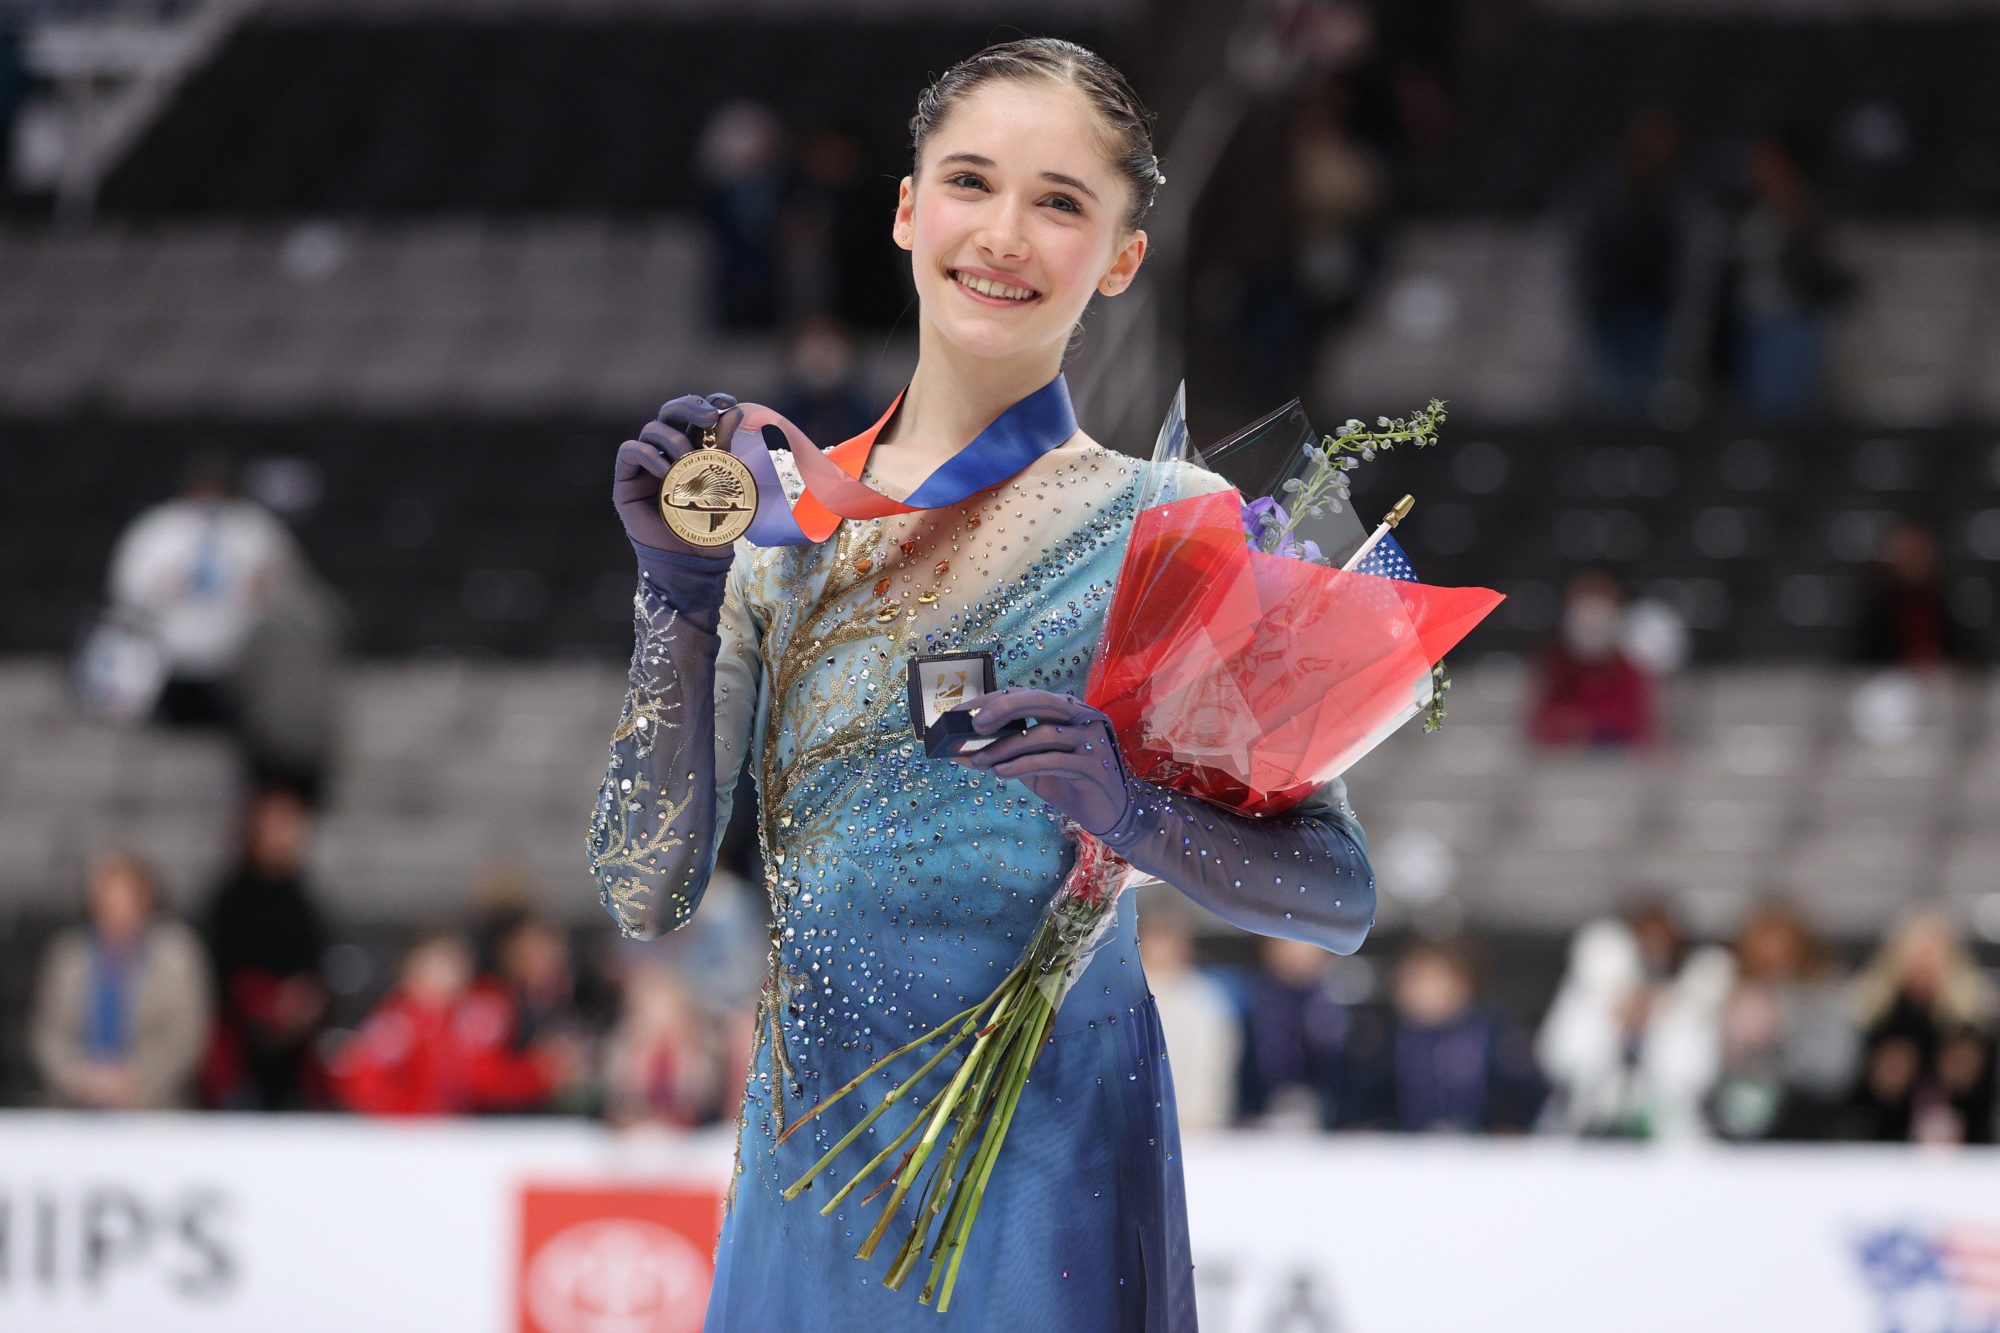 SAN JOSE, CALIFORNIA - JANUARY 27: Isabeau Levito poses with her gold medal after winning the Women's Singles Championship on day two of the 2023 TOYOTA U.S. Figure Skating Championships at SAP Center on January 27, 2023 in San Jose, California. (Photo by Ezra Shaw/Getty Images)